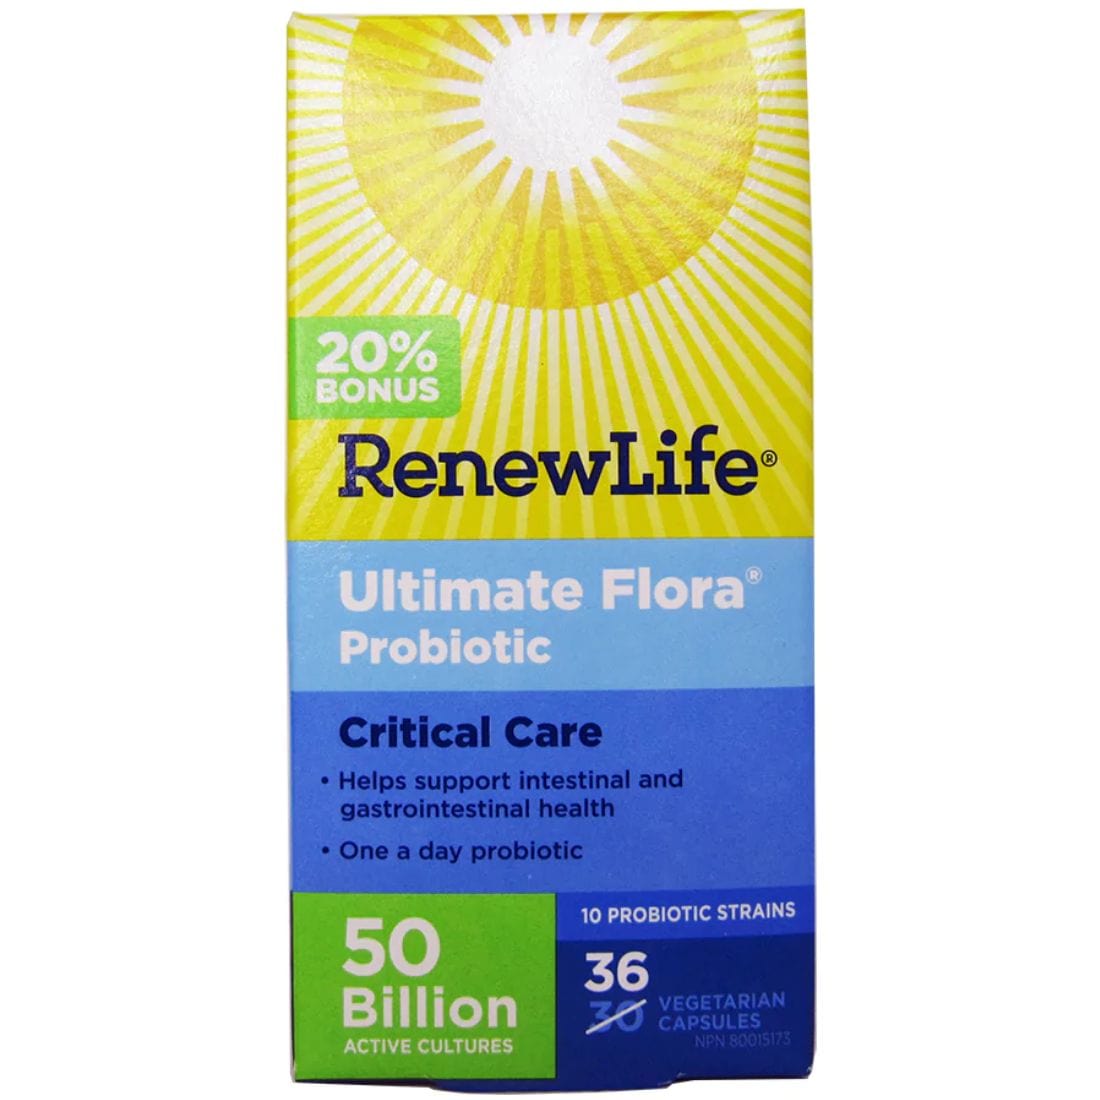 Renew Life Ultimate Flora Extra Care Probiotic 50 Billion Active Cultures, Shelf Stable, (Formerly Flora Critical Care Probiotic)